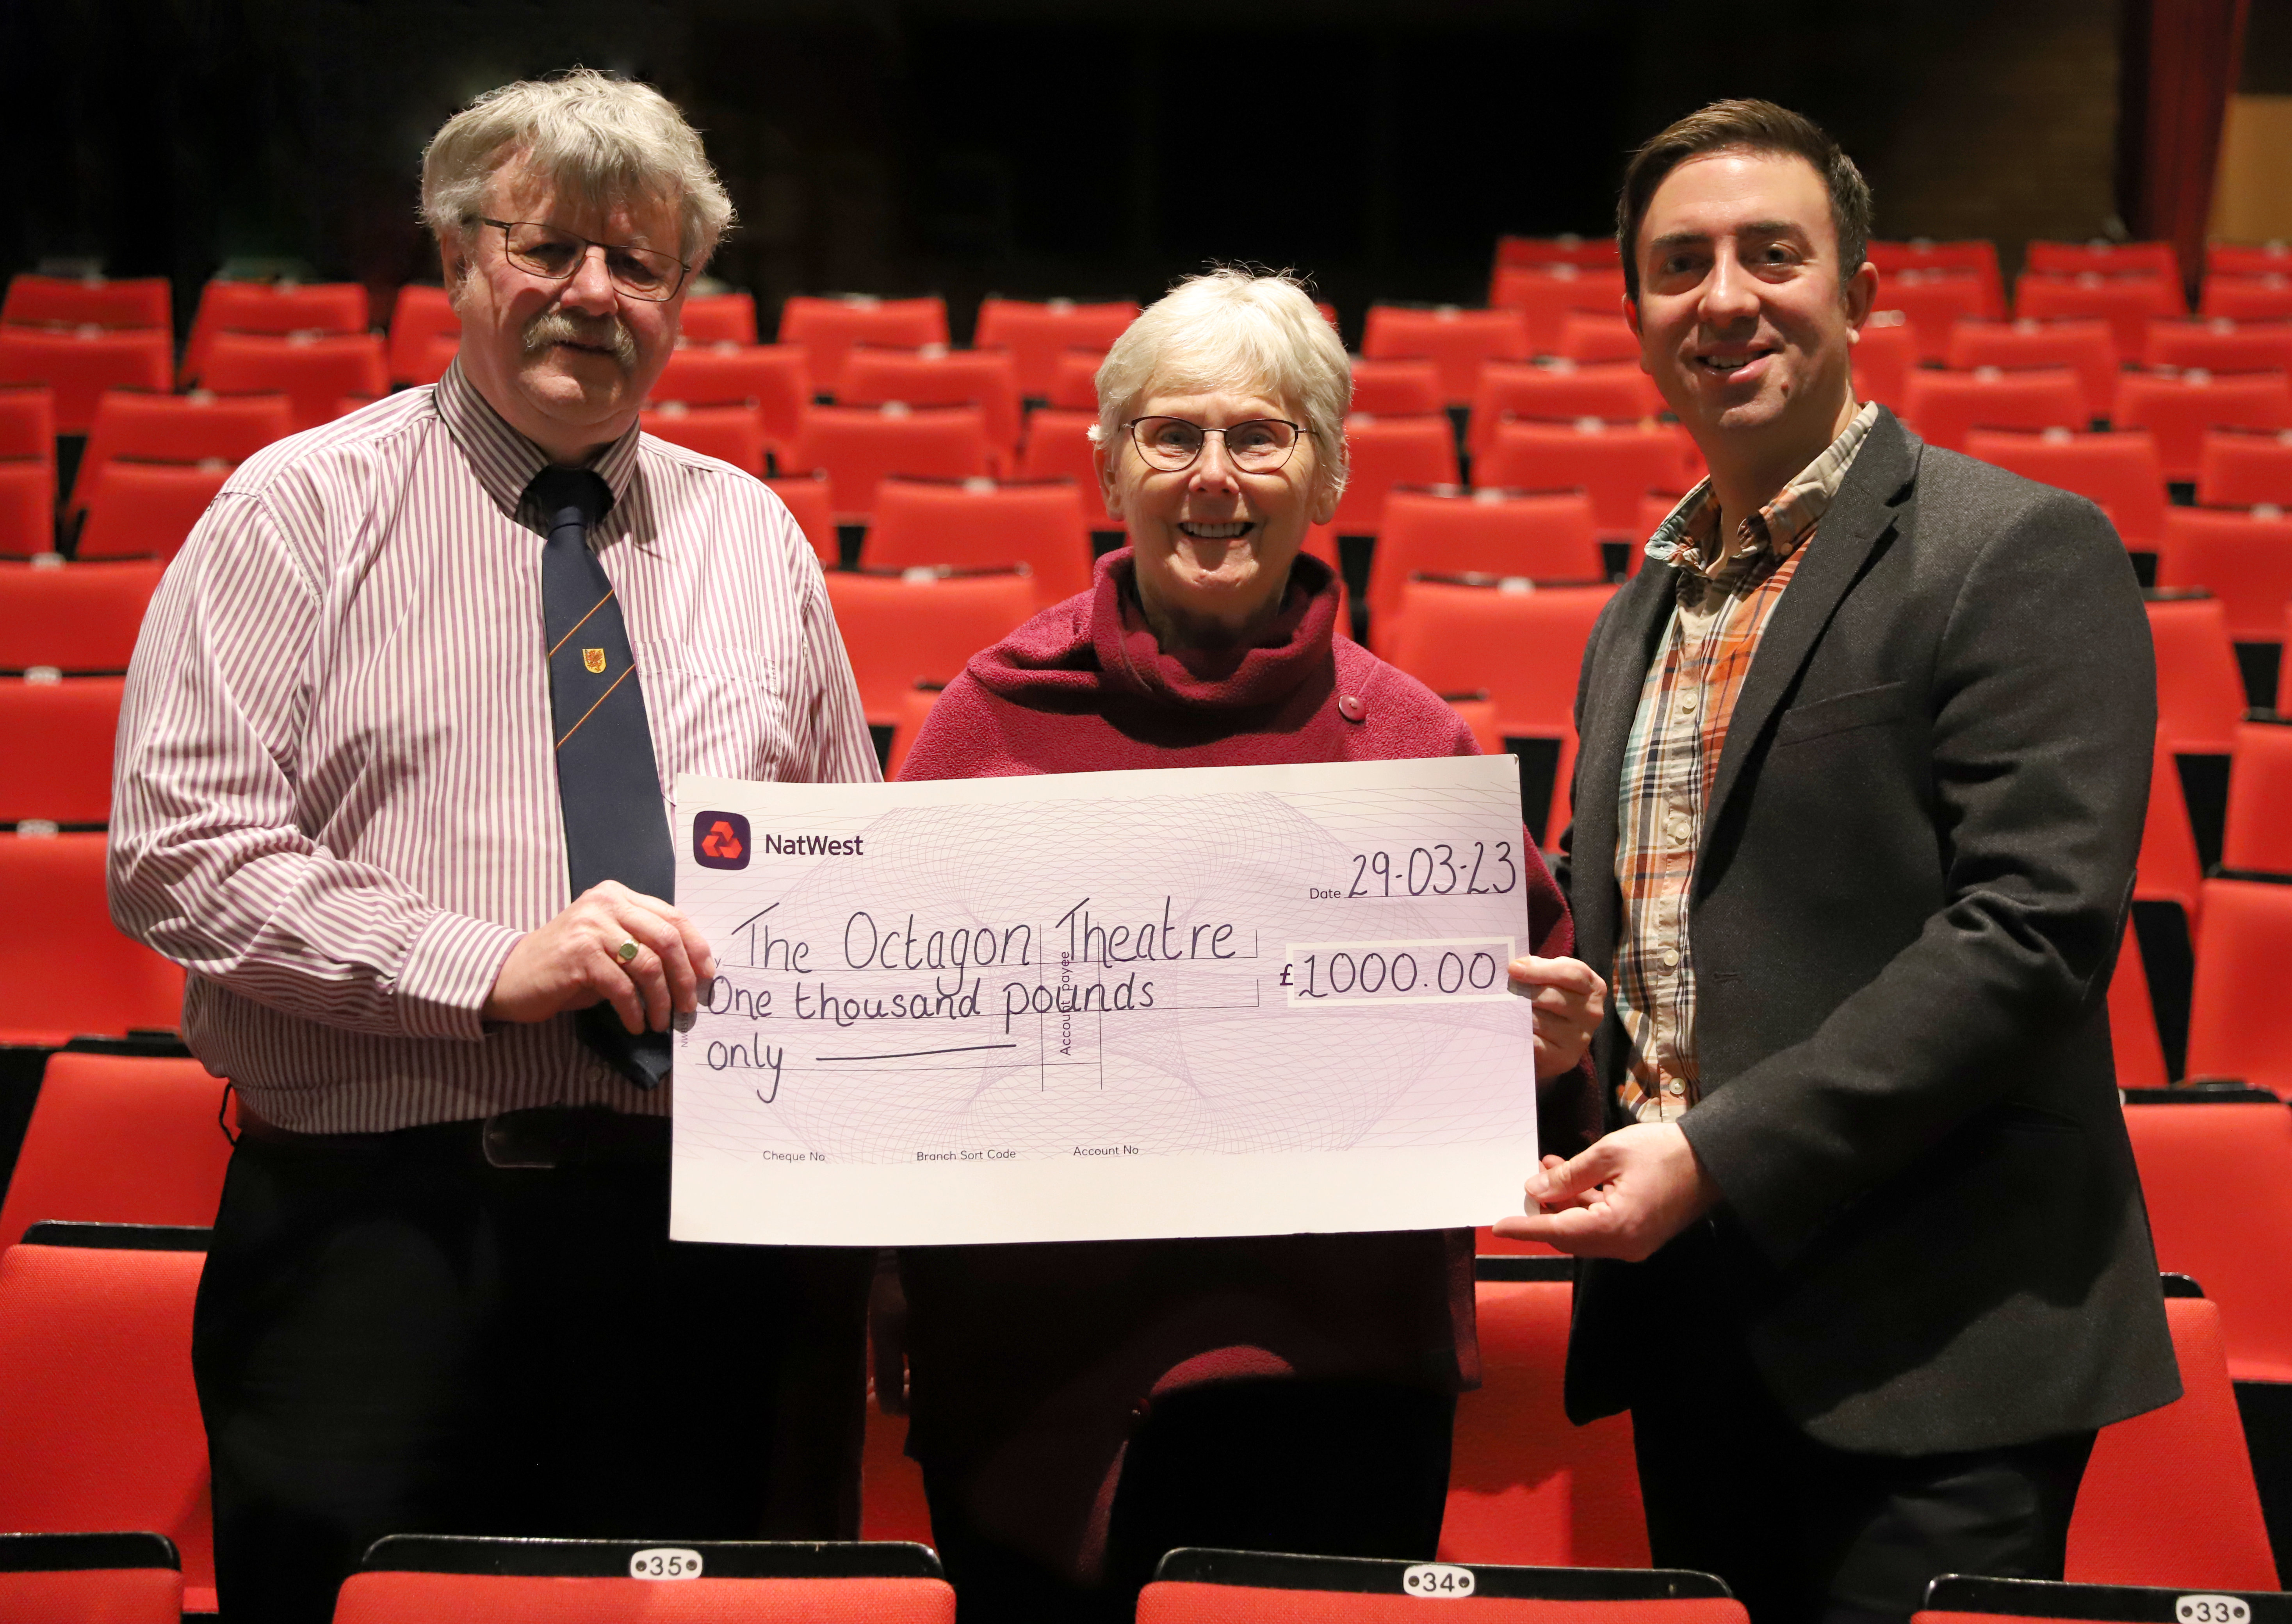 Liz Pike (middle) presents Adam Burgan (right) and Councillor Mike Best (left) a cheque totalling £1,000